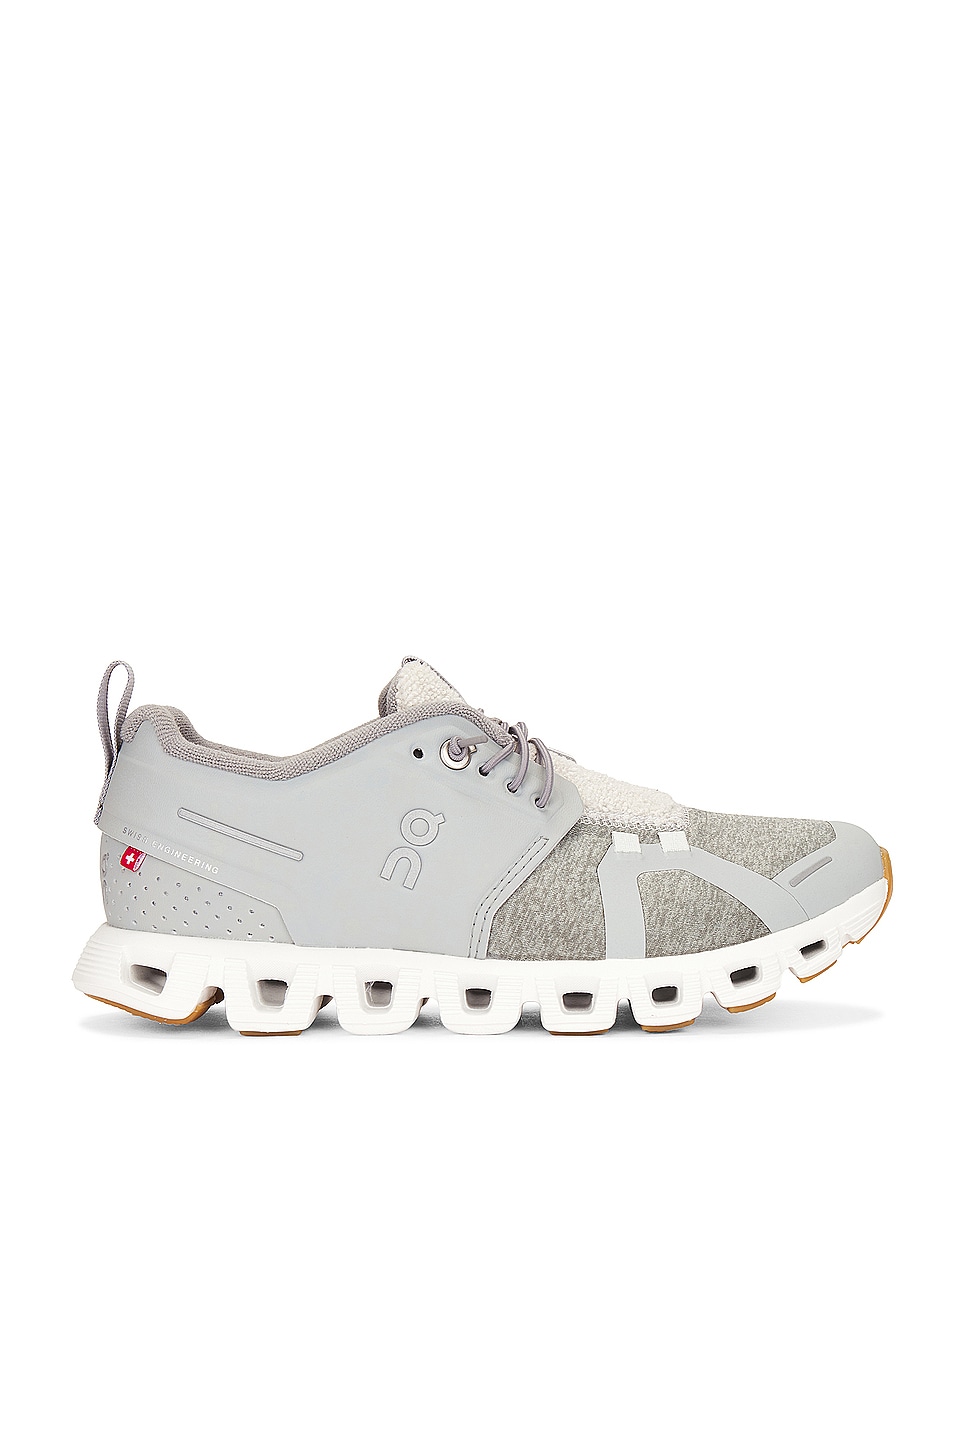 Image 1 of On Cloud 5 Terry Sneaker in Glacier & White